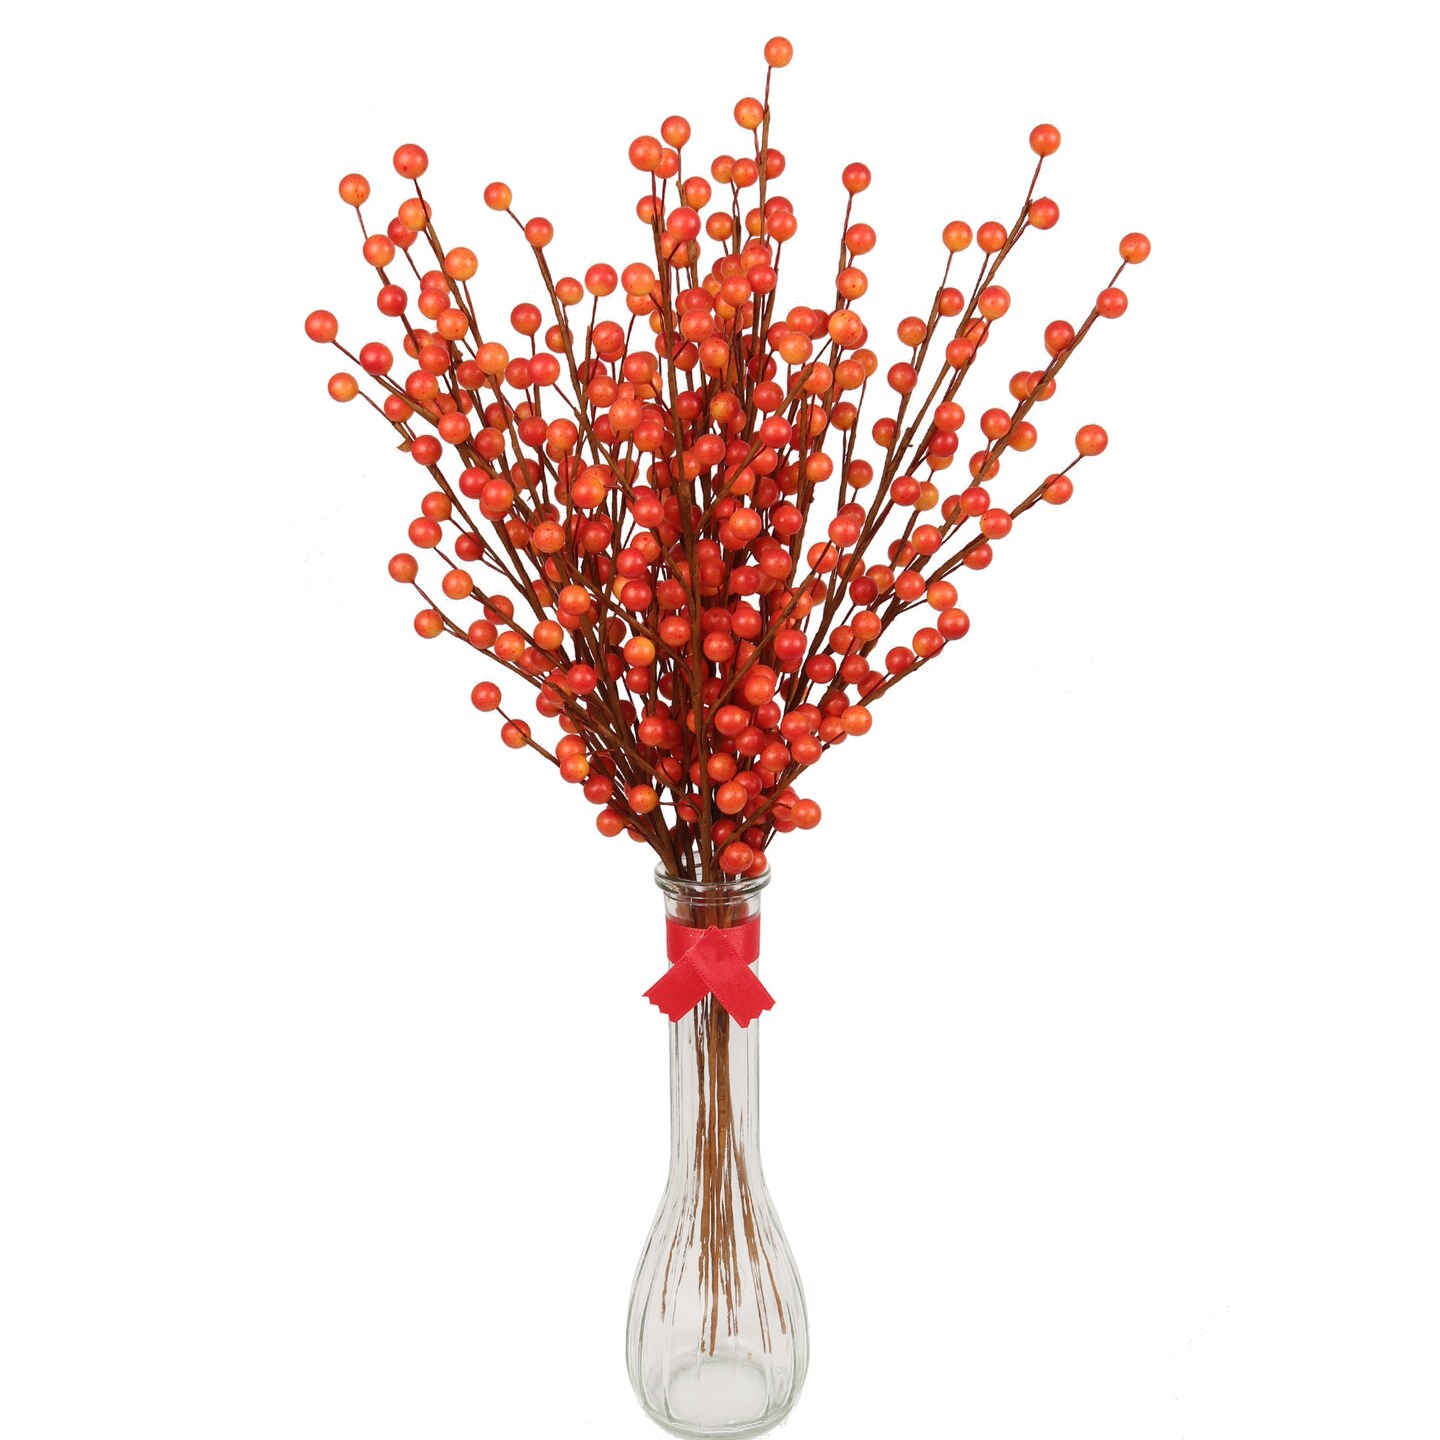 Set of 24: Artificial Berry Spray with 35 Realistic Berries | 17-Inch | Vibrant Orange | Autumn Accents | Fall Berries | Fruit Picks | for Arrangements | Parties &#x26; Events | Home &#x26; Office Decor